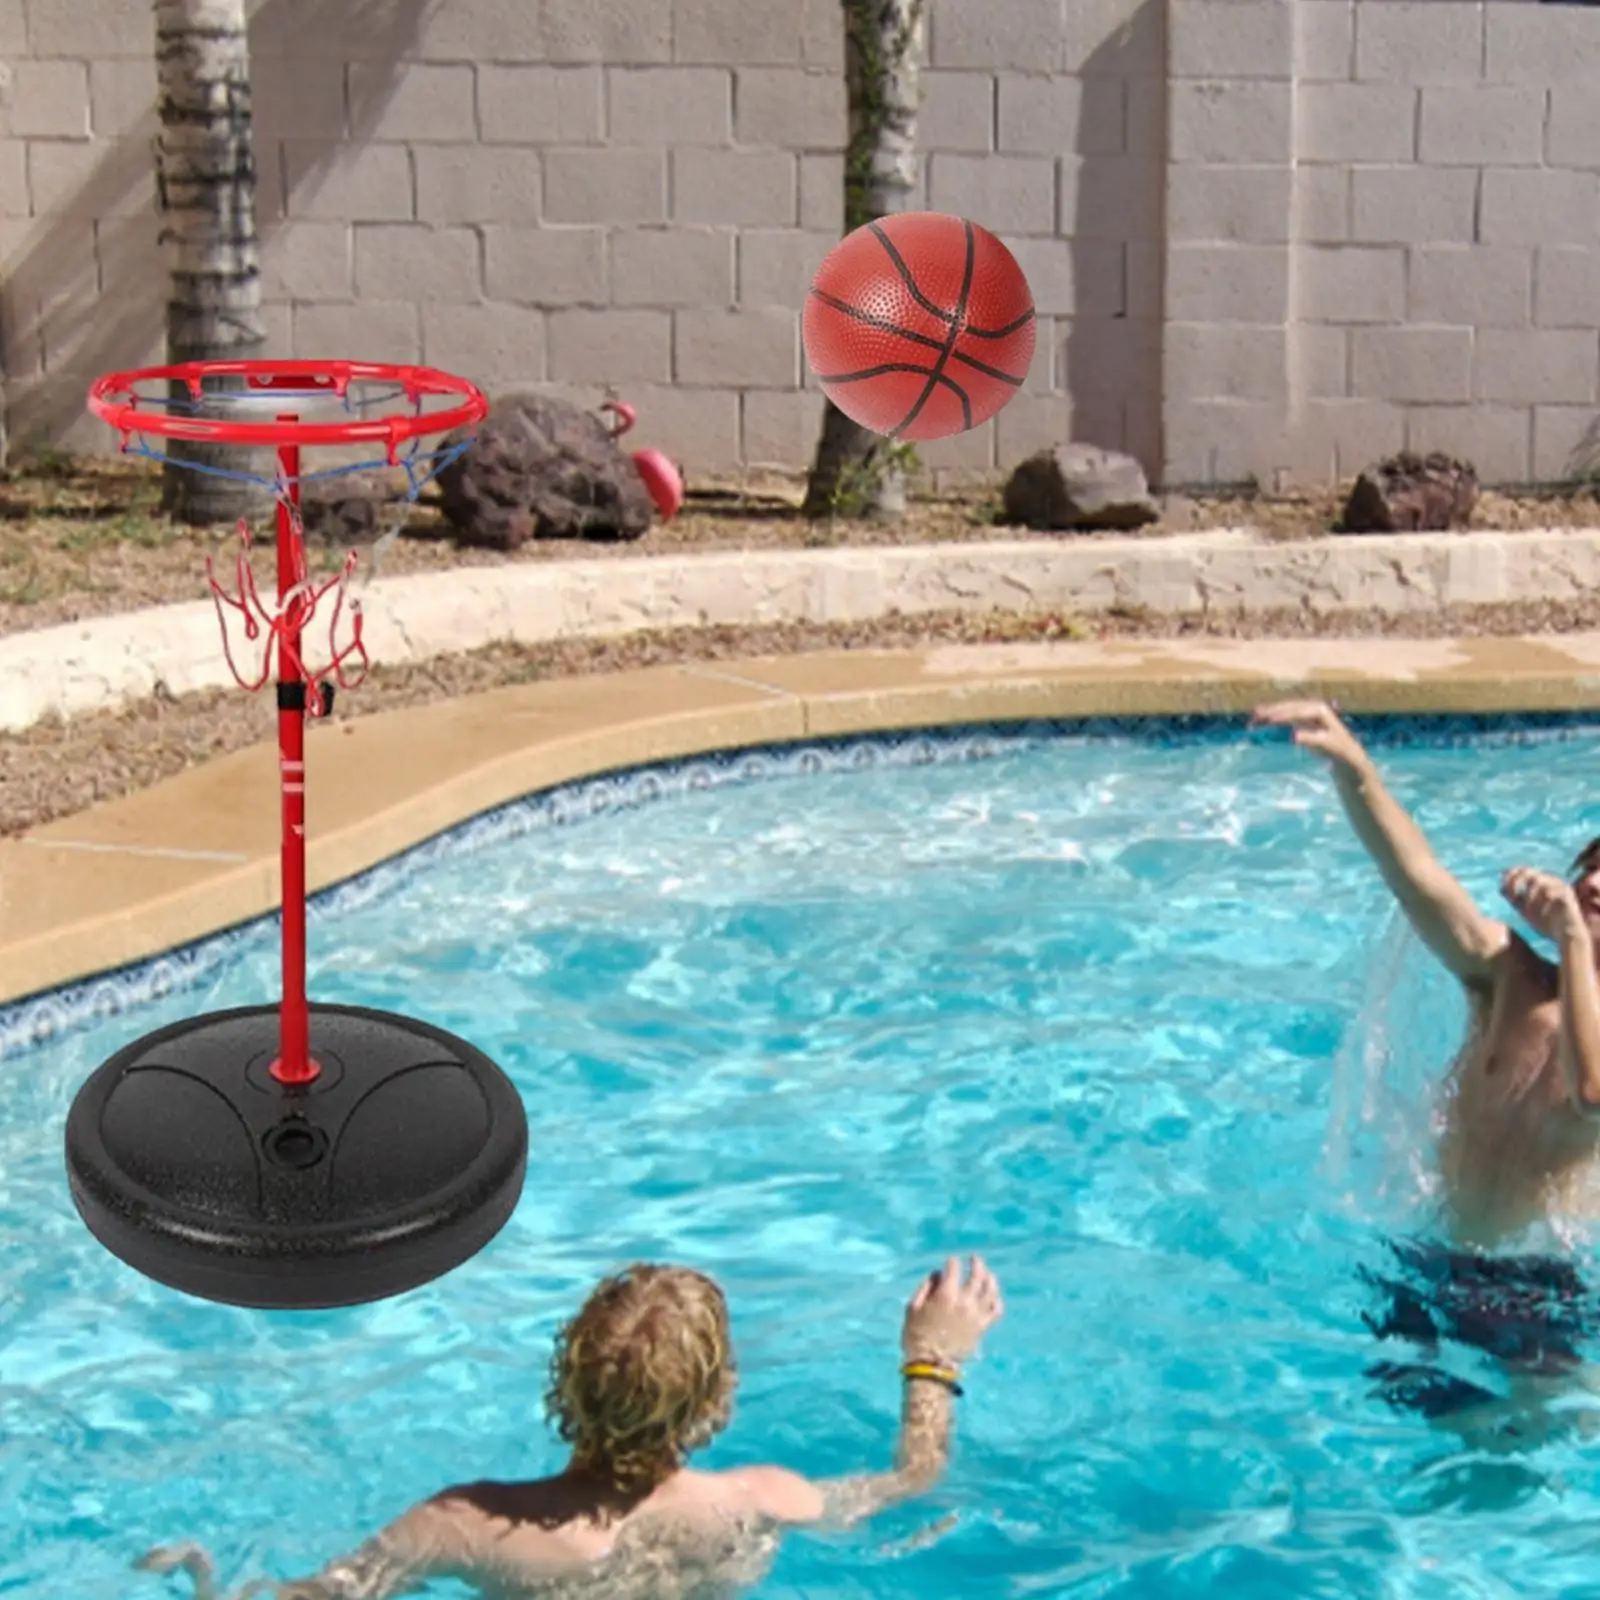 Floating Pool Basketball Hoop Water Basketball Stand for Birthday Gifts